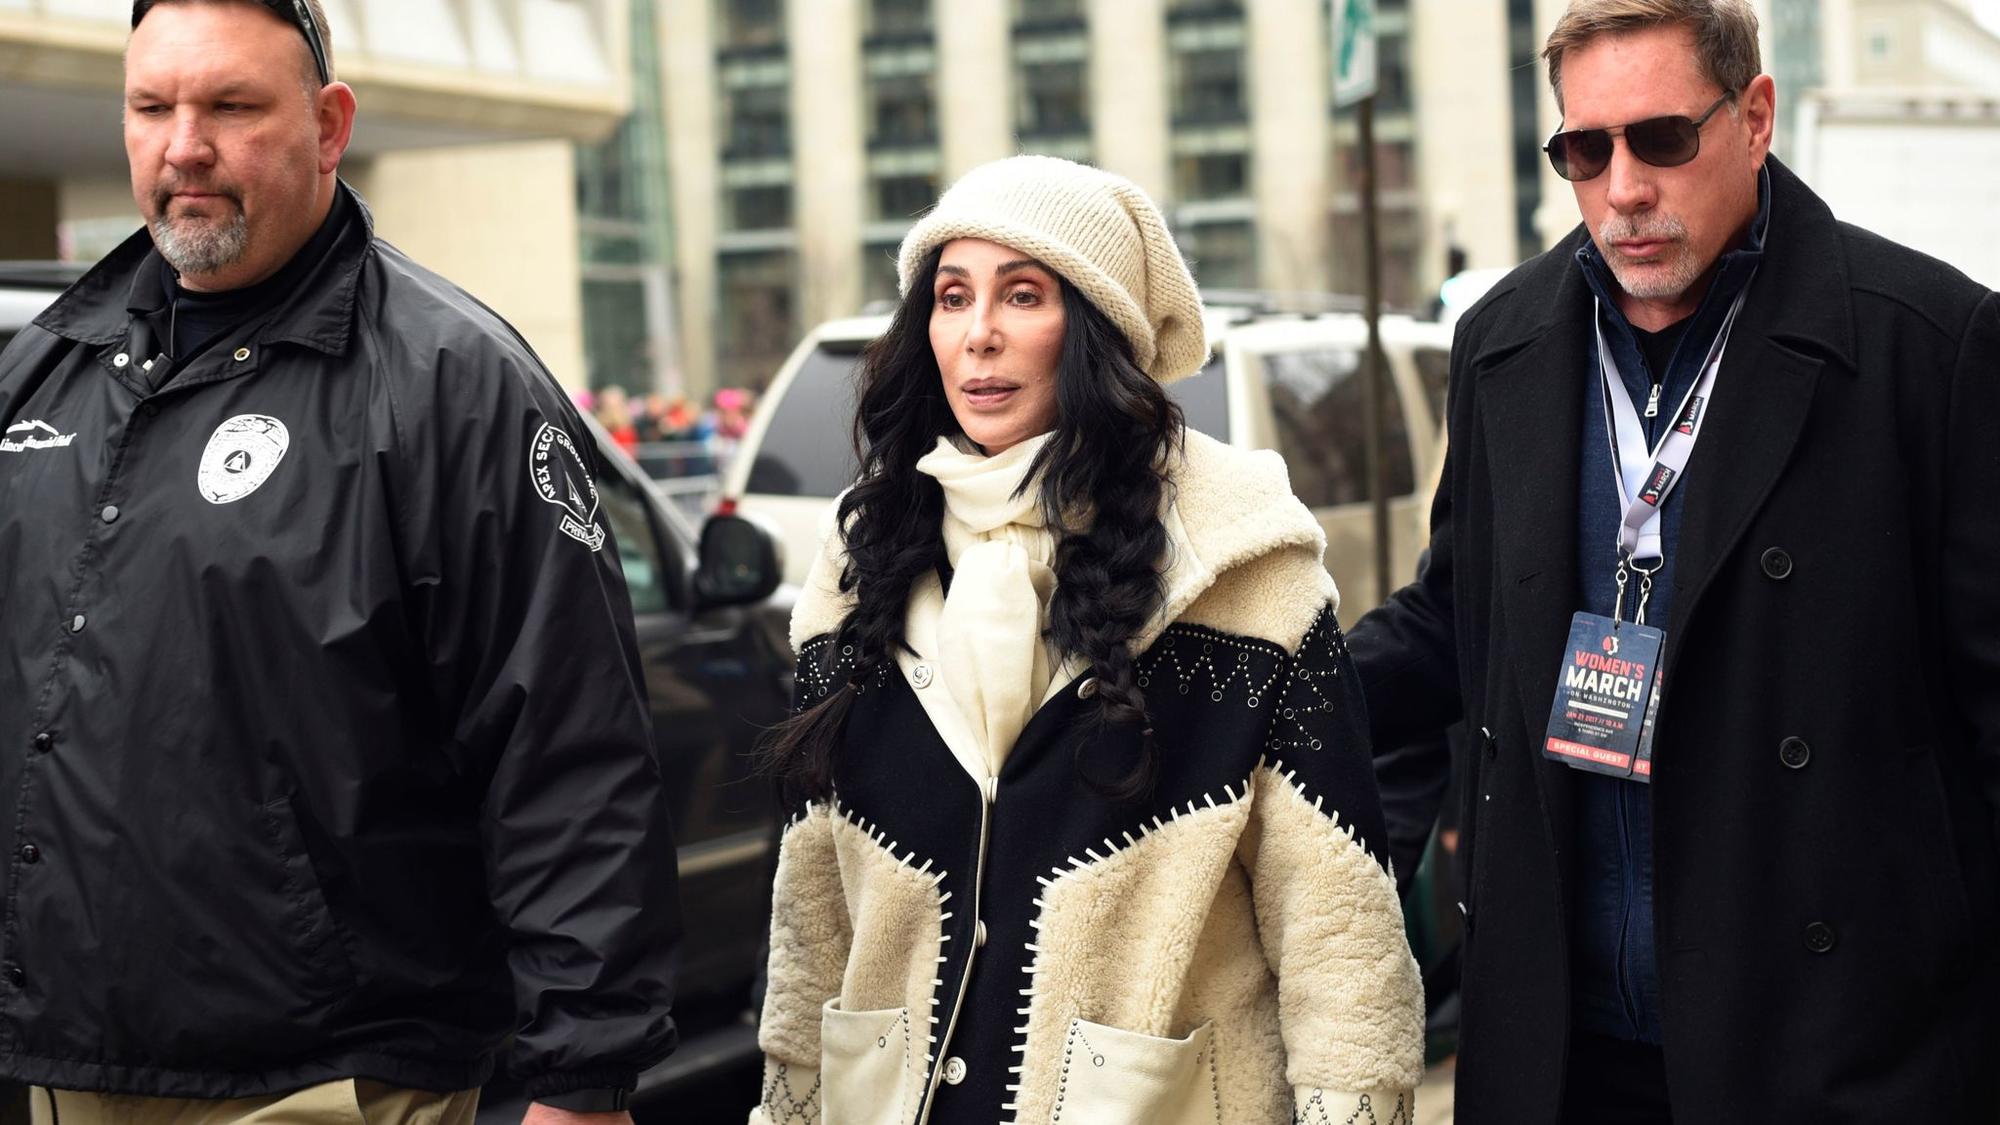 Cher arrives for the Women's March on Washington on Independence Ave. (Sait Serkan Gurbuz / Associated Press)